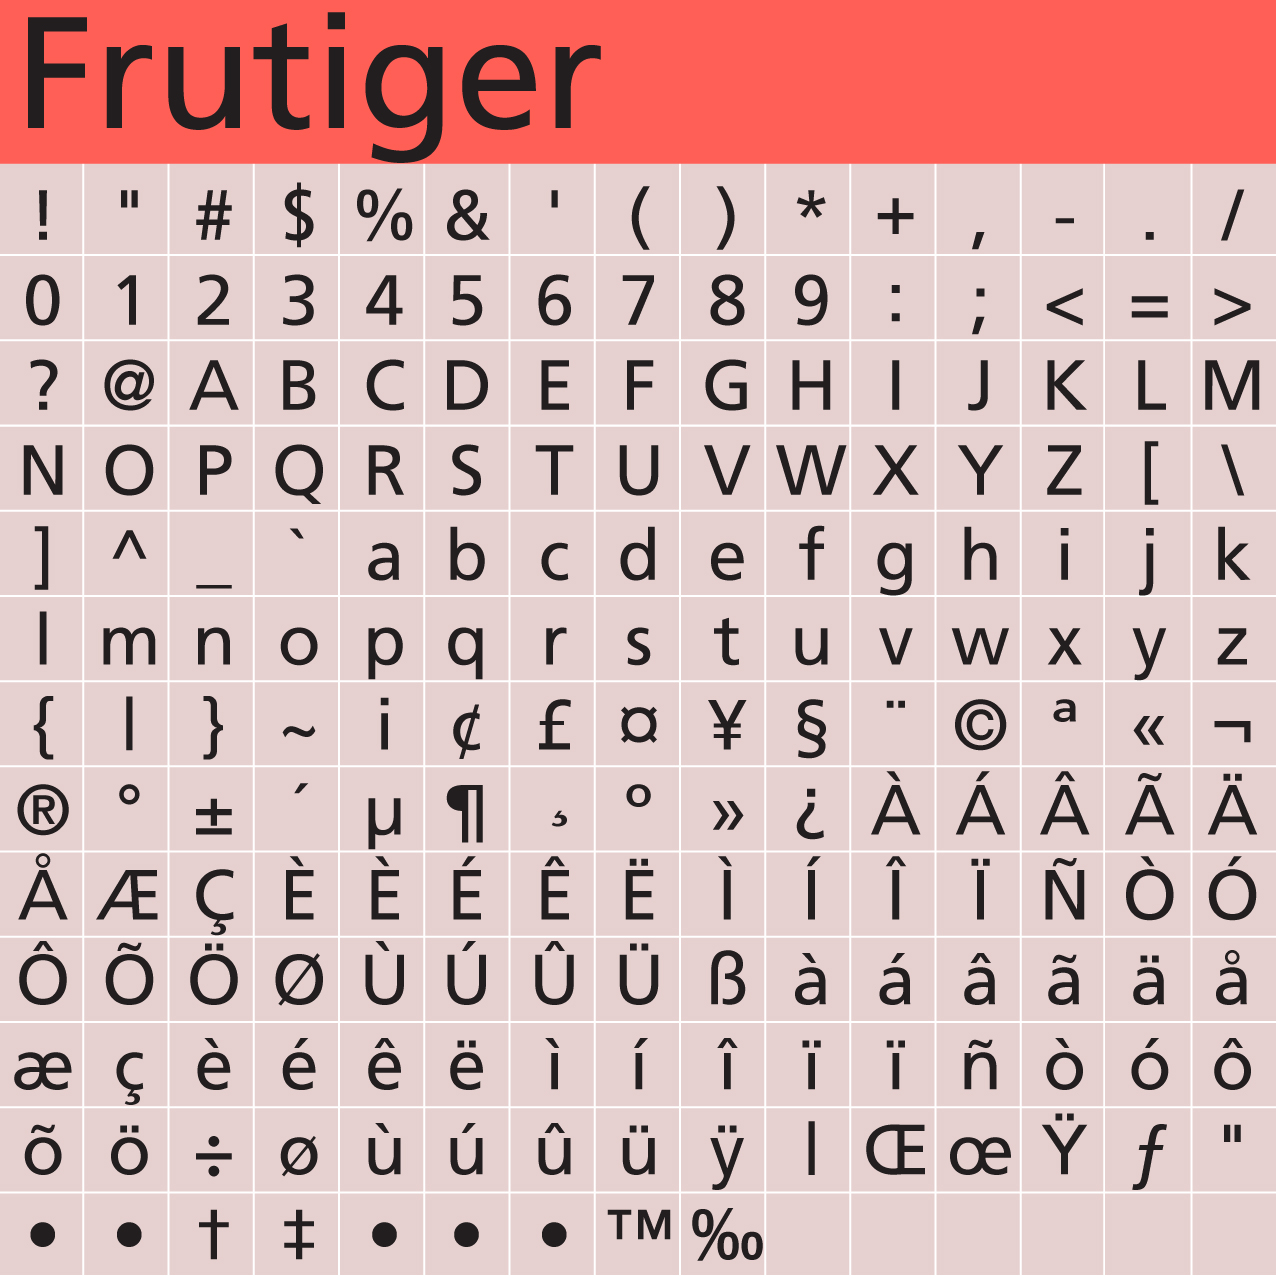 File Frutiger Exemple Complet Jpg Wikimedia Commons